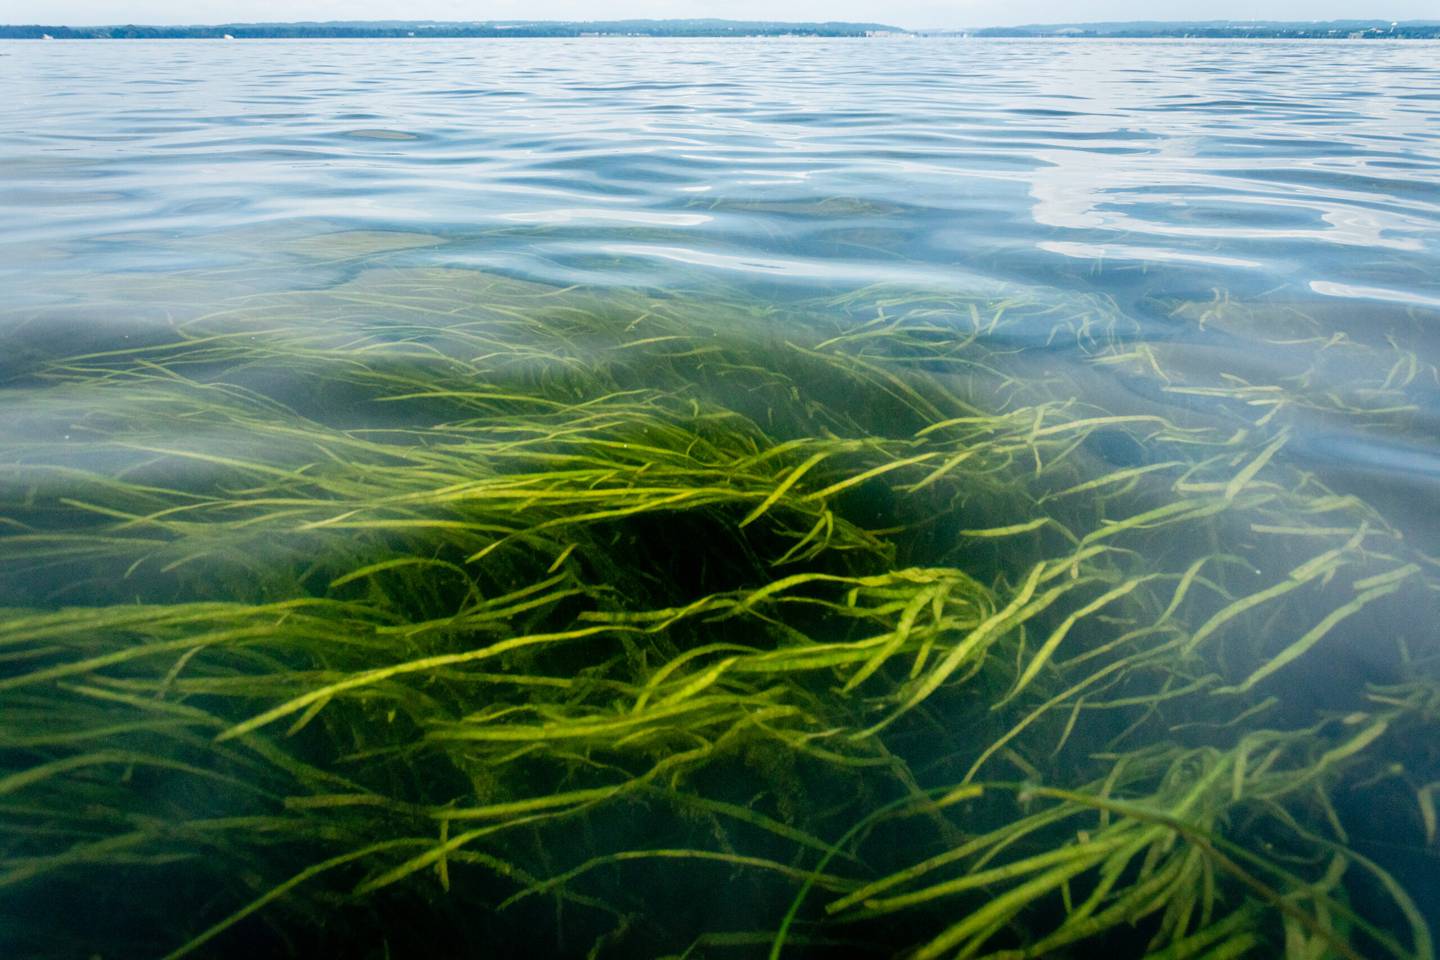 Wild celery and other bay grasses grow in the Susquehanna Flats south of Havre de Grace, Md., on Aug. 2, 2019.